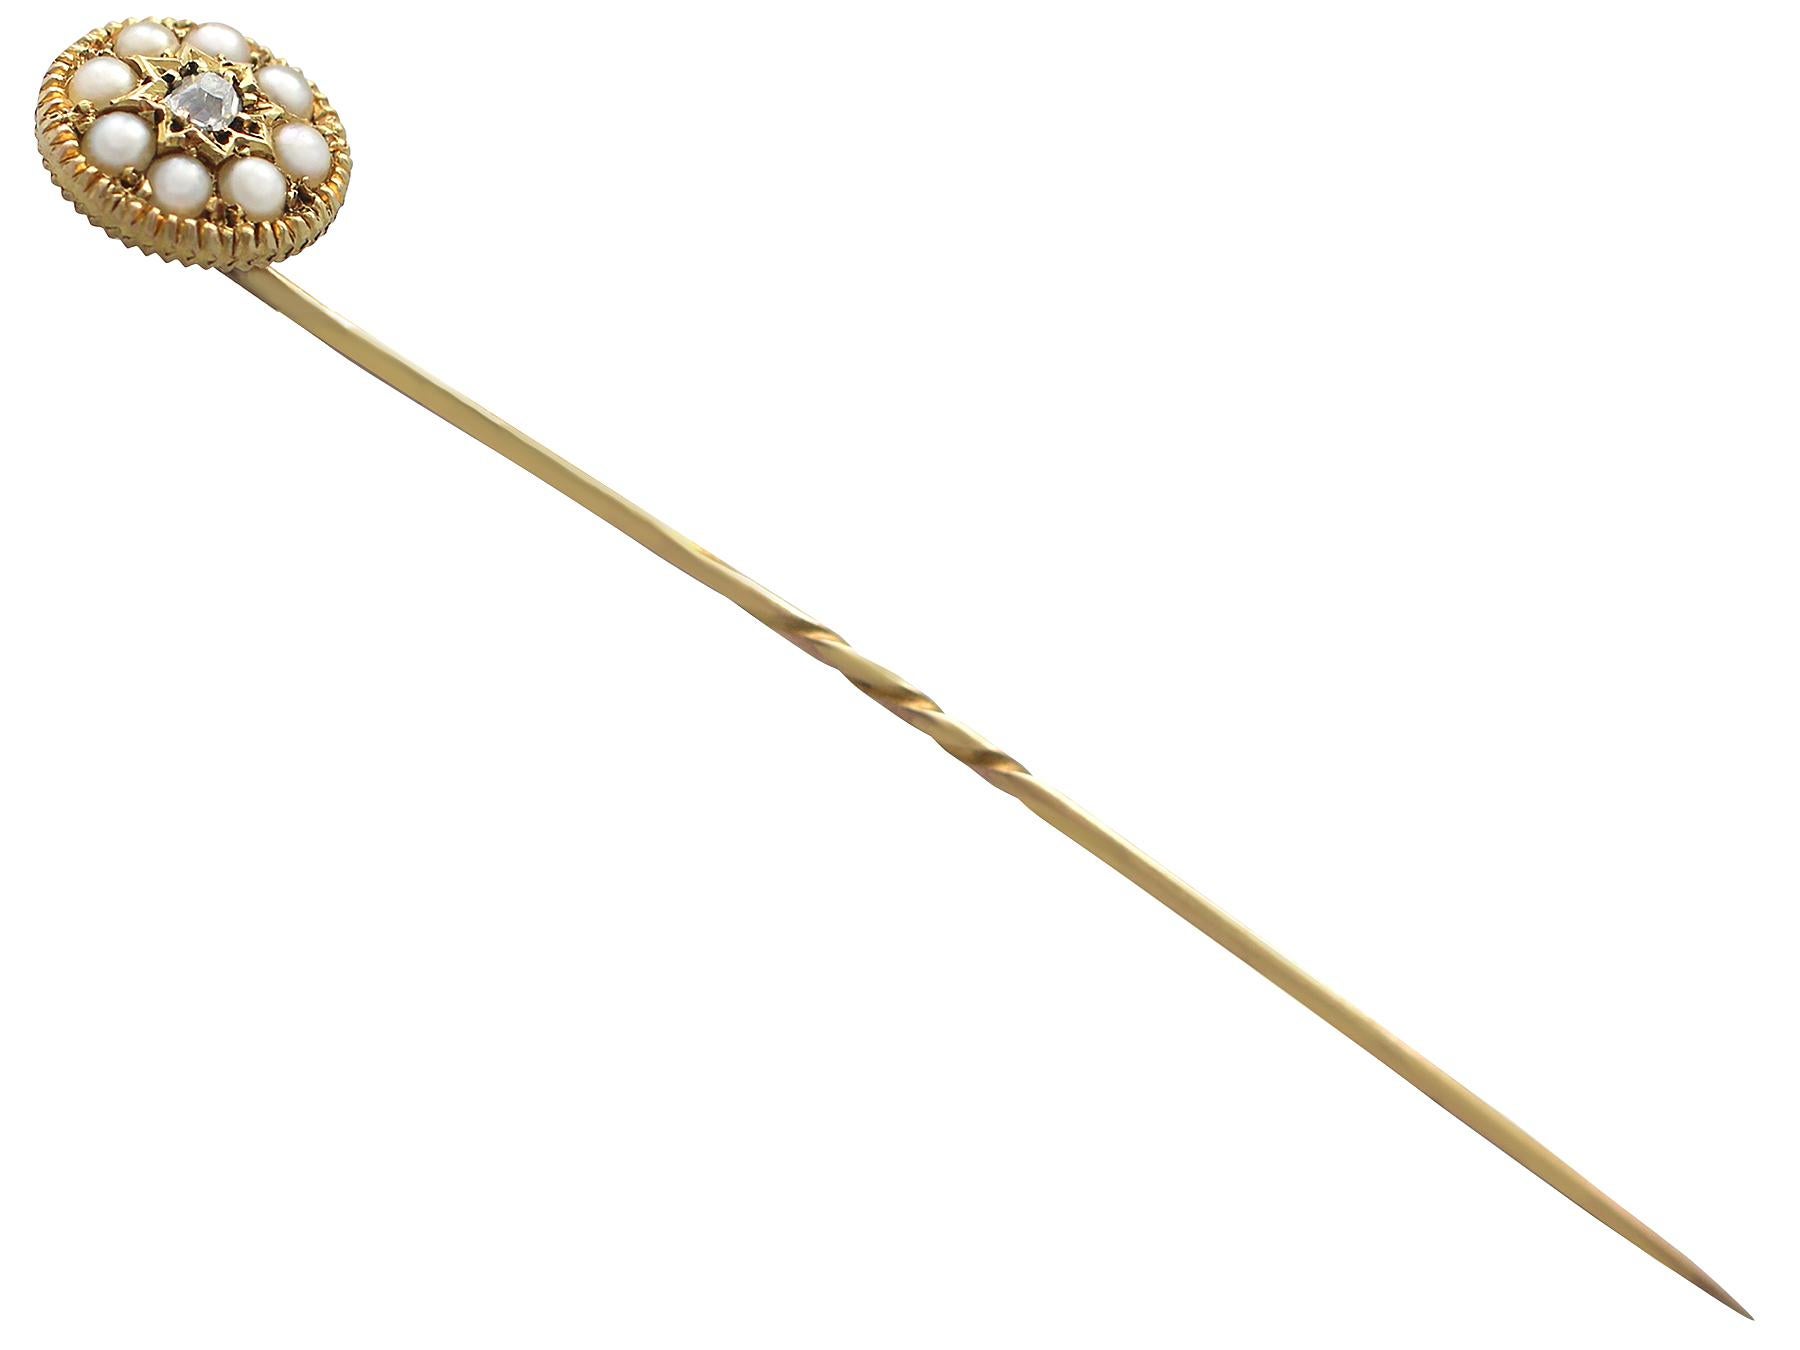 An antique Victorian 0.04 carat diamond and seed pearl, 14 karat yellow gold and base metal pin brooch; part of our antique jewelry and estate jewelry collections

This fine diamond brooch has been crafted in 14k yellow gold with a base metal